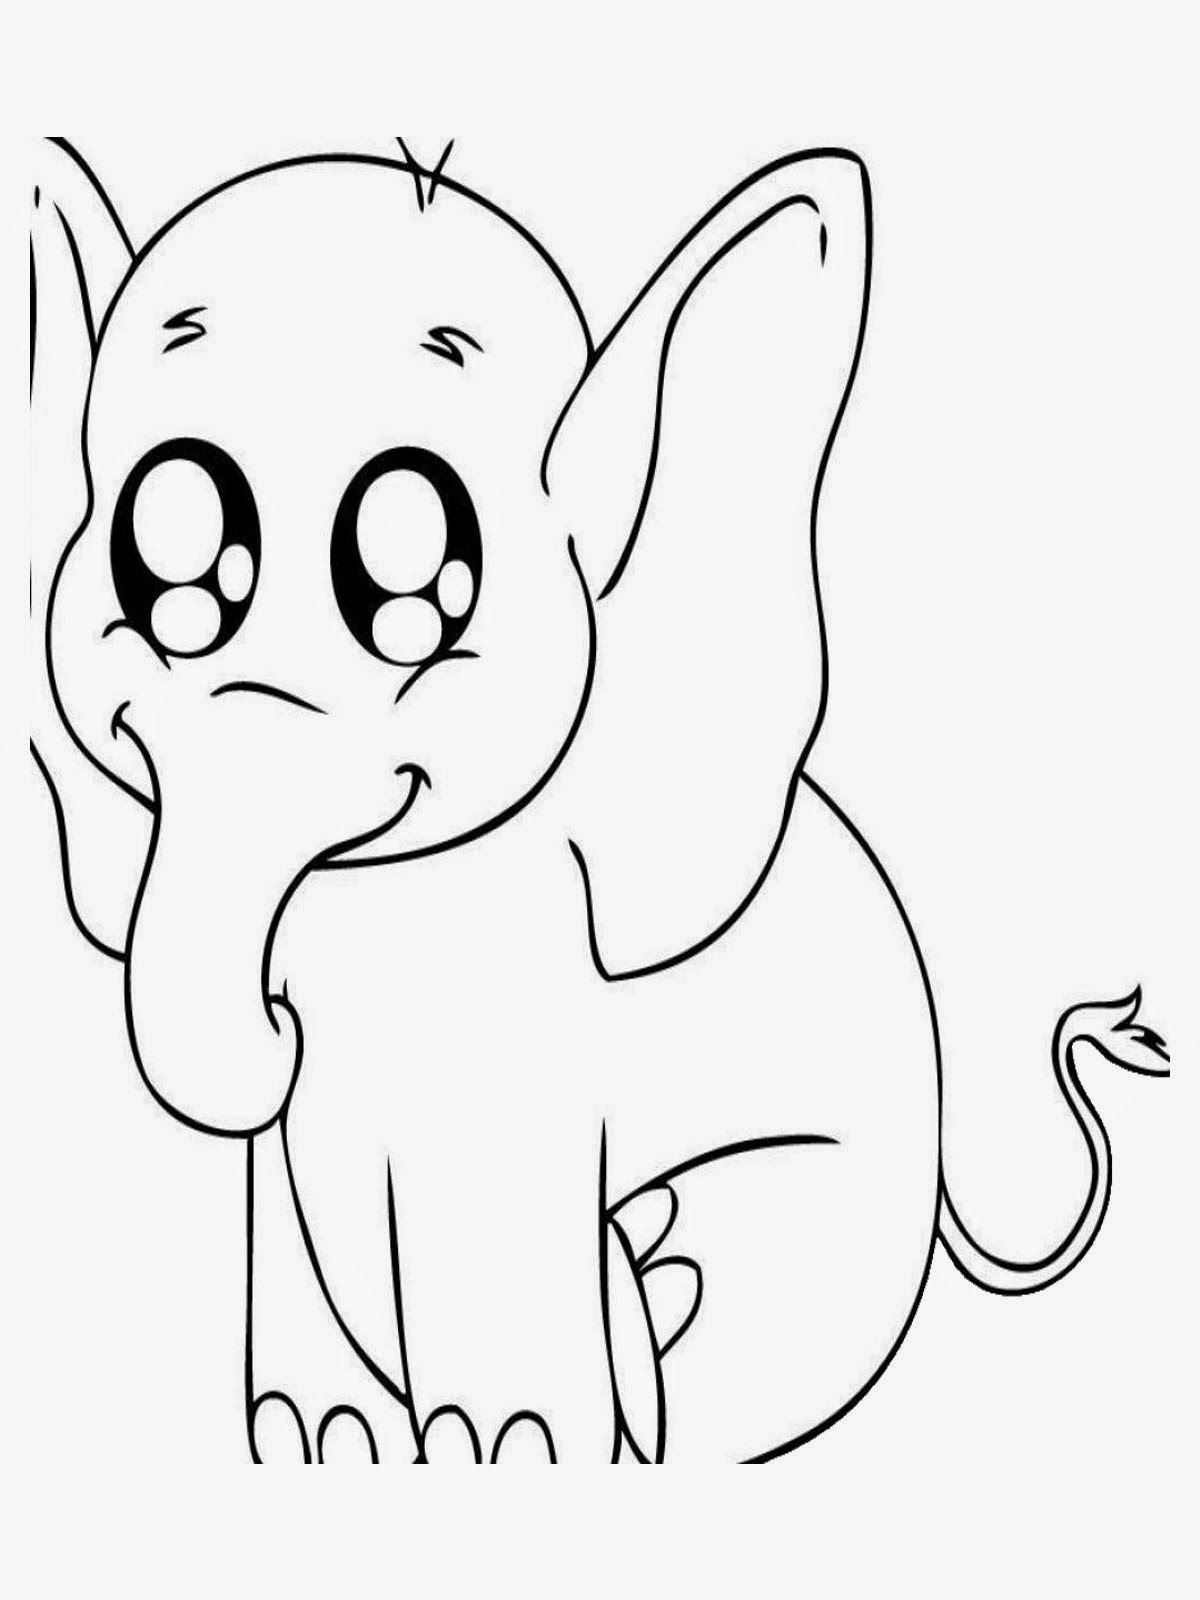 Coloring Pages Cute and Easy Coloring Pages Free and ...